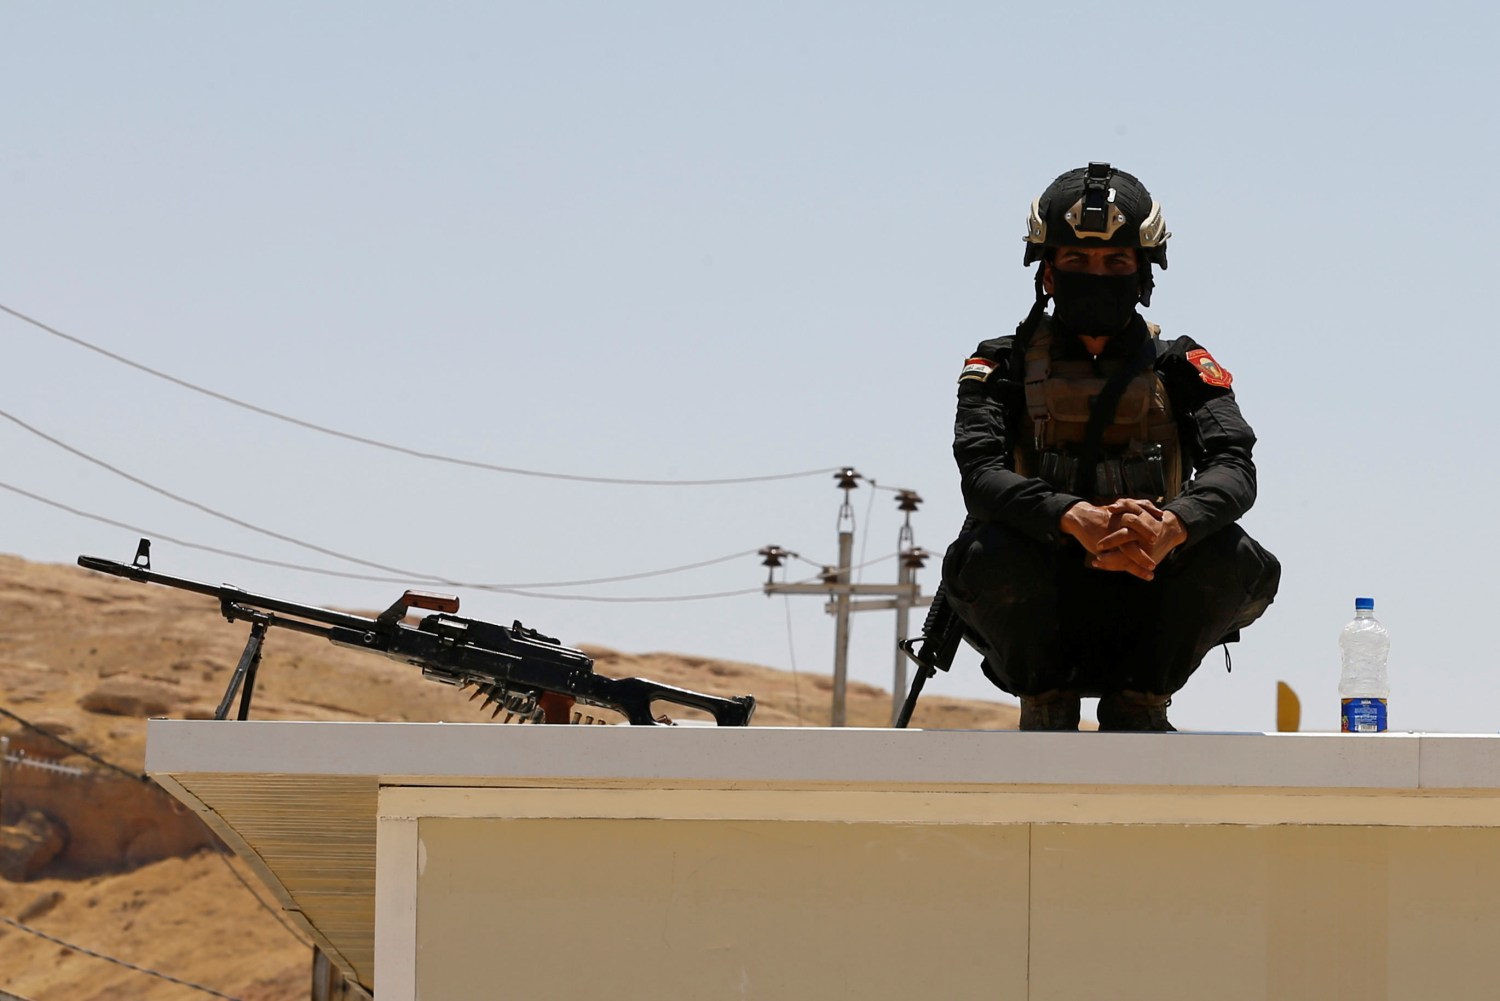 A member of Iraqi security forces is seen on the Iraqi side of Mandali border crossing between Iraq and Iran, in Mandali, Iraq July 11, 2020. REUTERS/Thaier al-Sudani/Pool